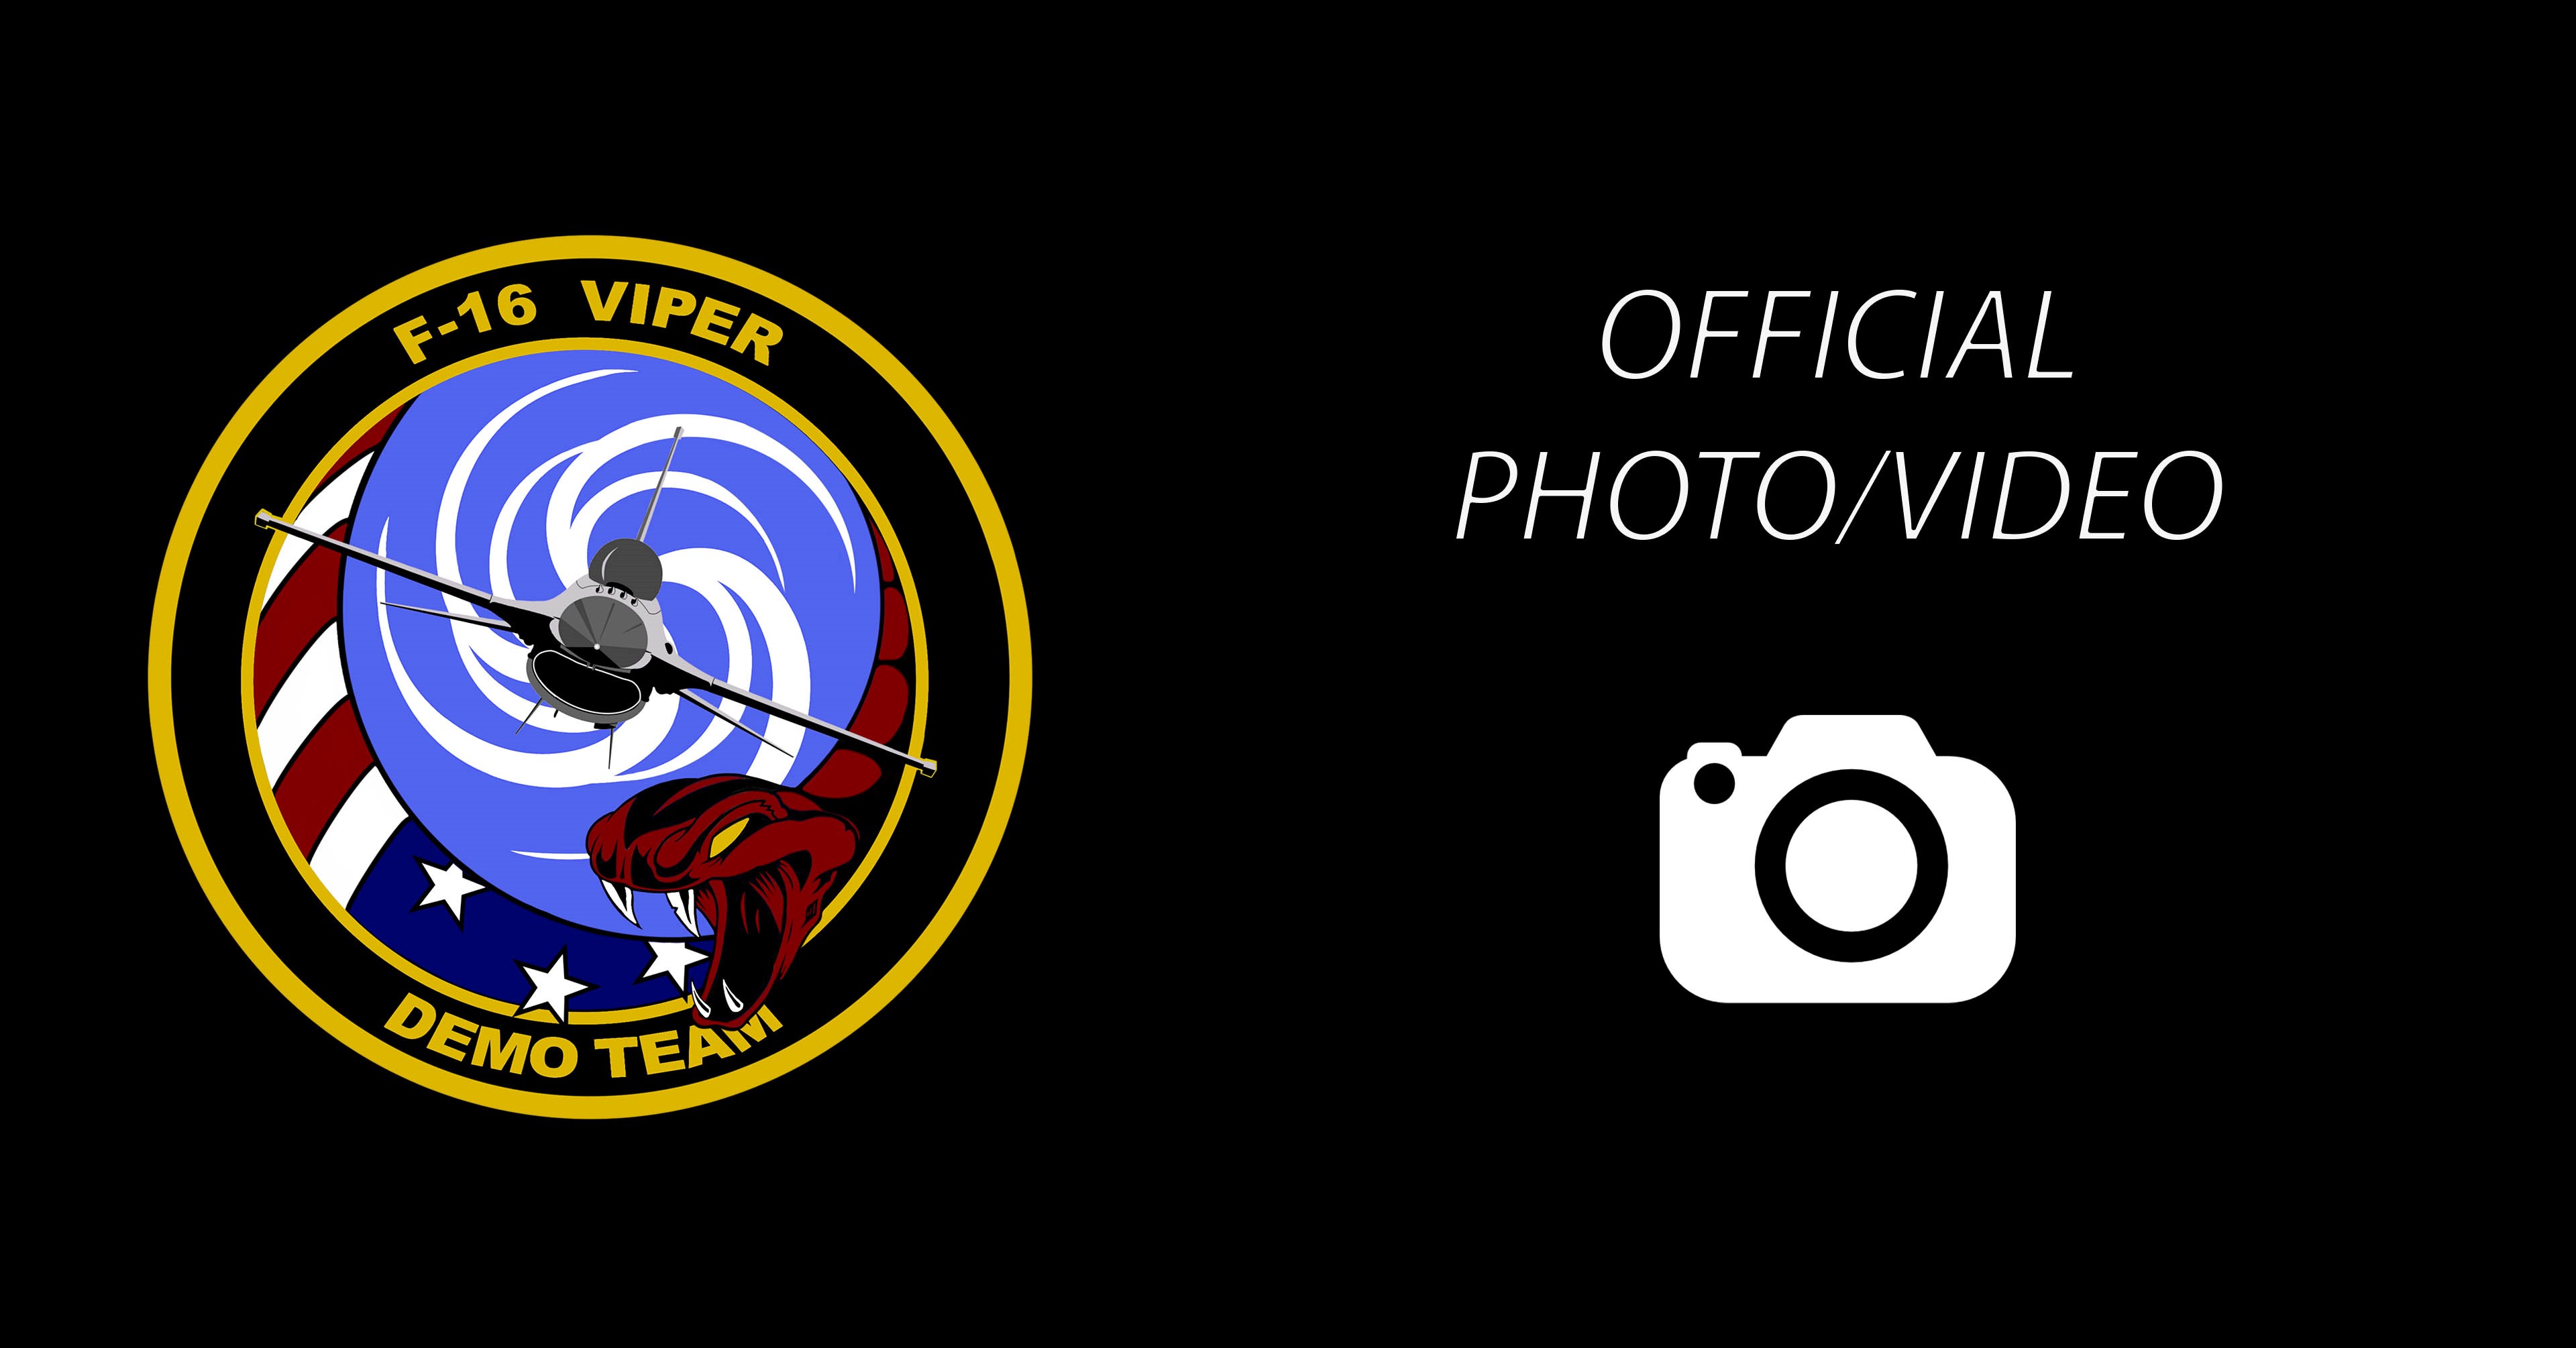 a graphic of the viper demo team logo, and a link to the official photo/video dvids page